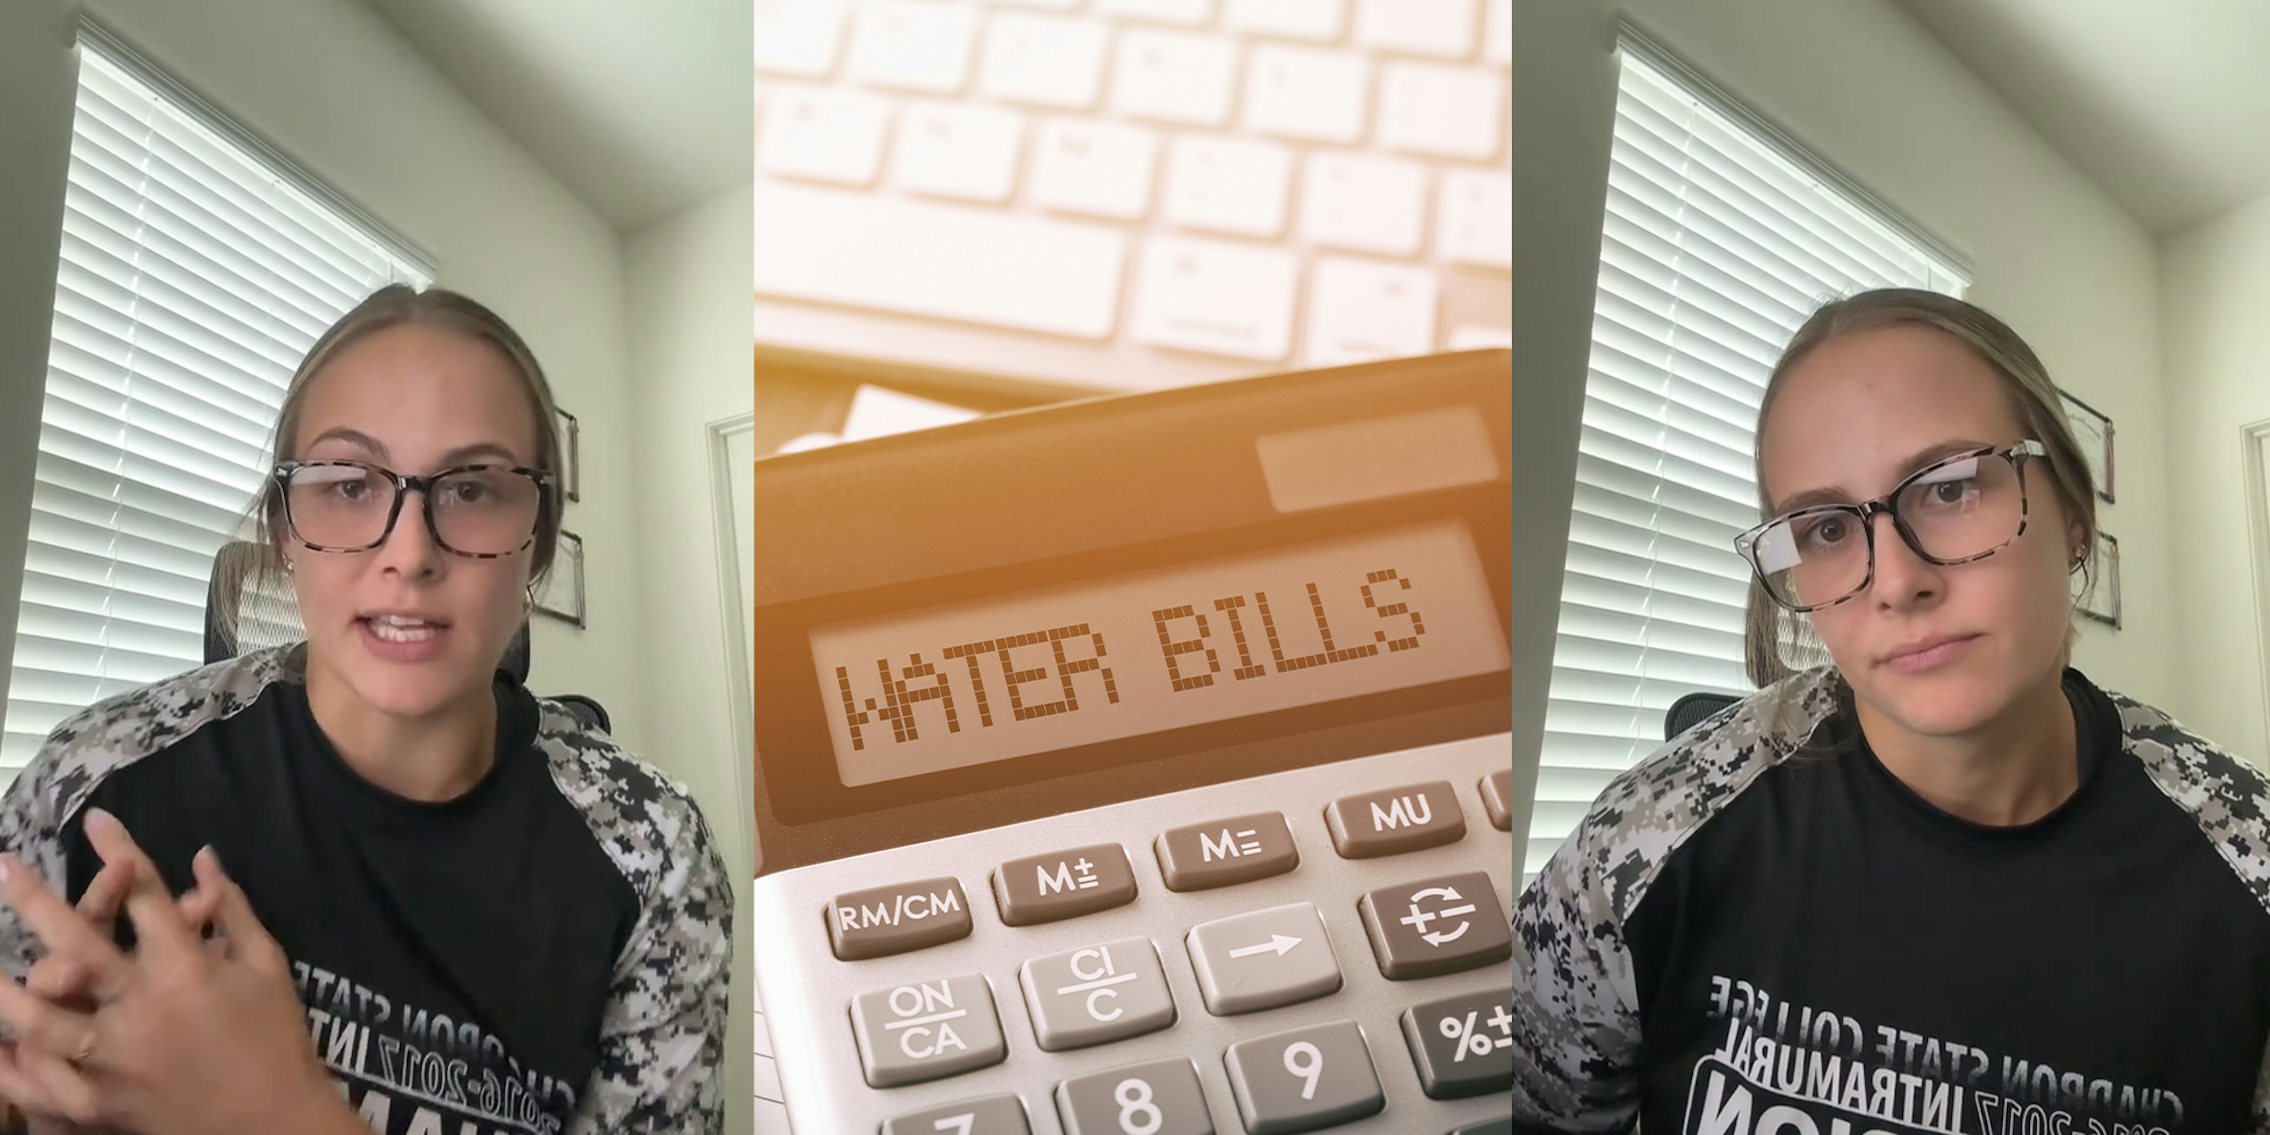 Tenant says she she caught city overcharging her by $337 for her water bill